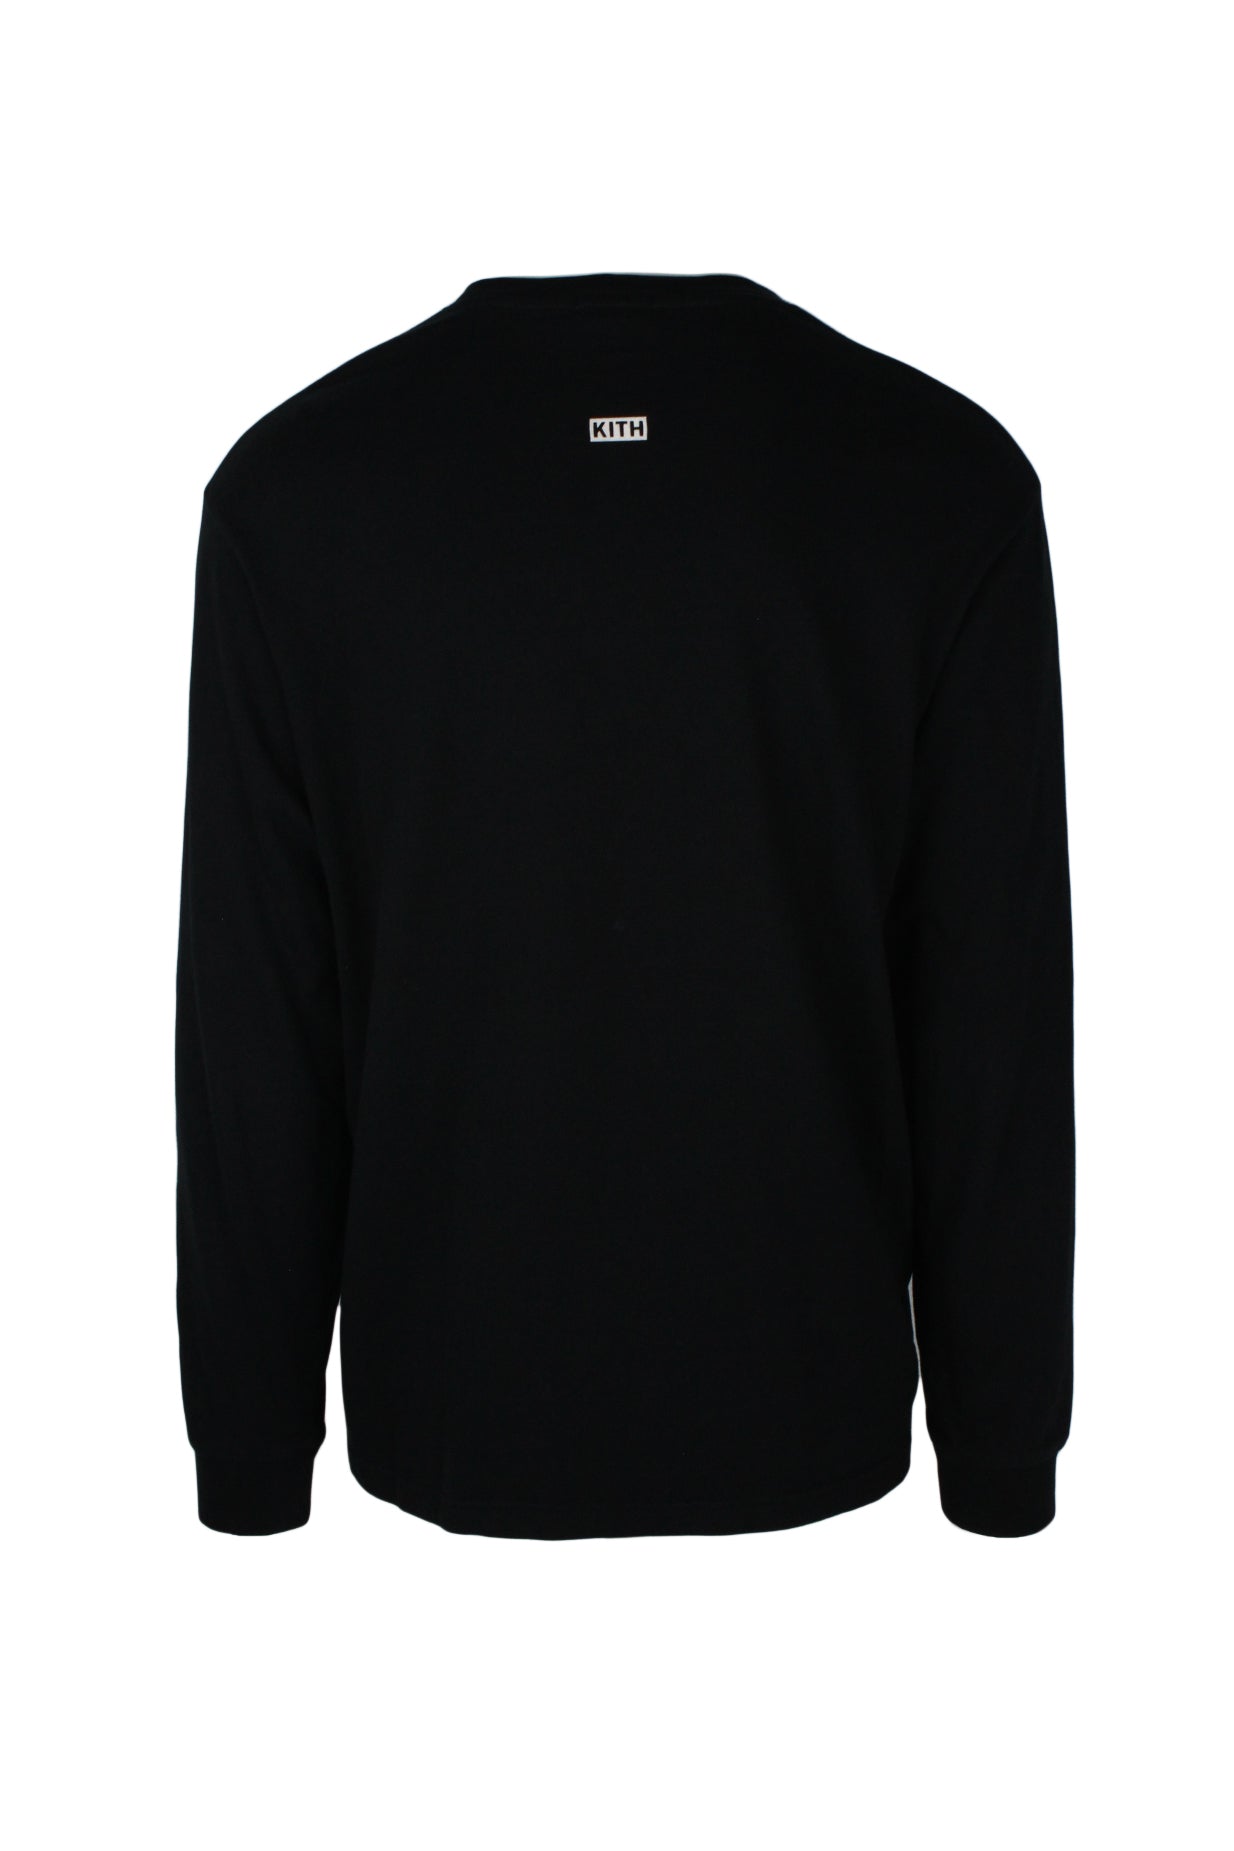 back angle of long sleeve t-shirt. small branding in white velvet near neck with text 'kith'.